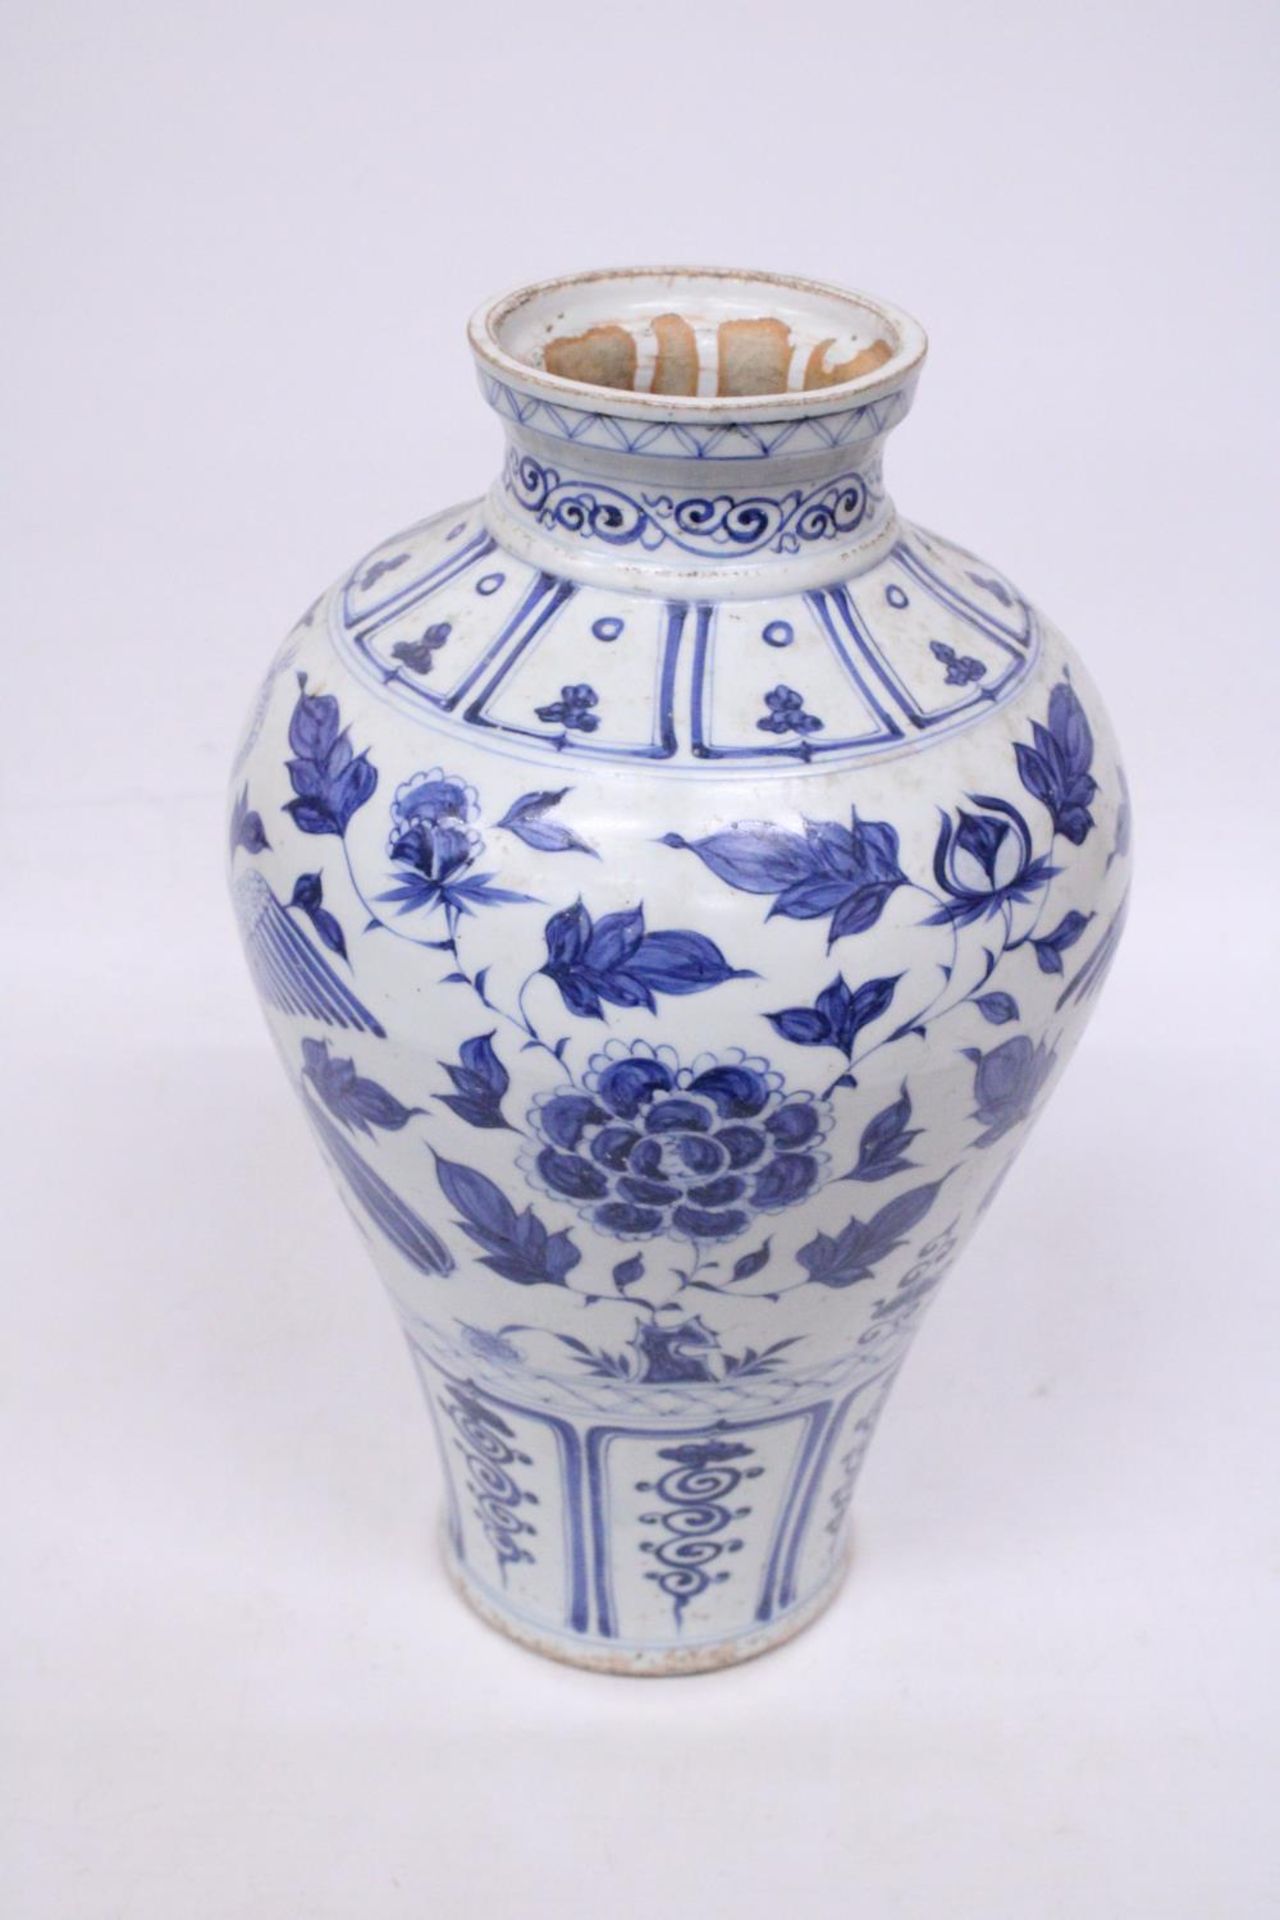 A LARGE CHINESE MING STYLE BLUE AND WHITE POTTERY MEIPING VASE DECORATED WITH CRANES IN FLIGHT - - Image 5 of 5